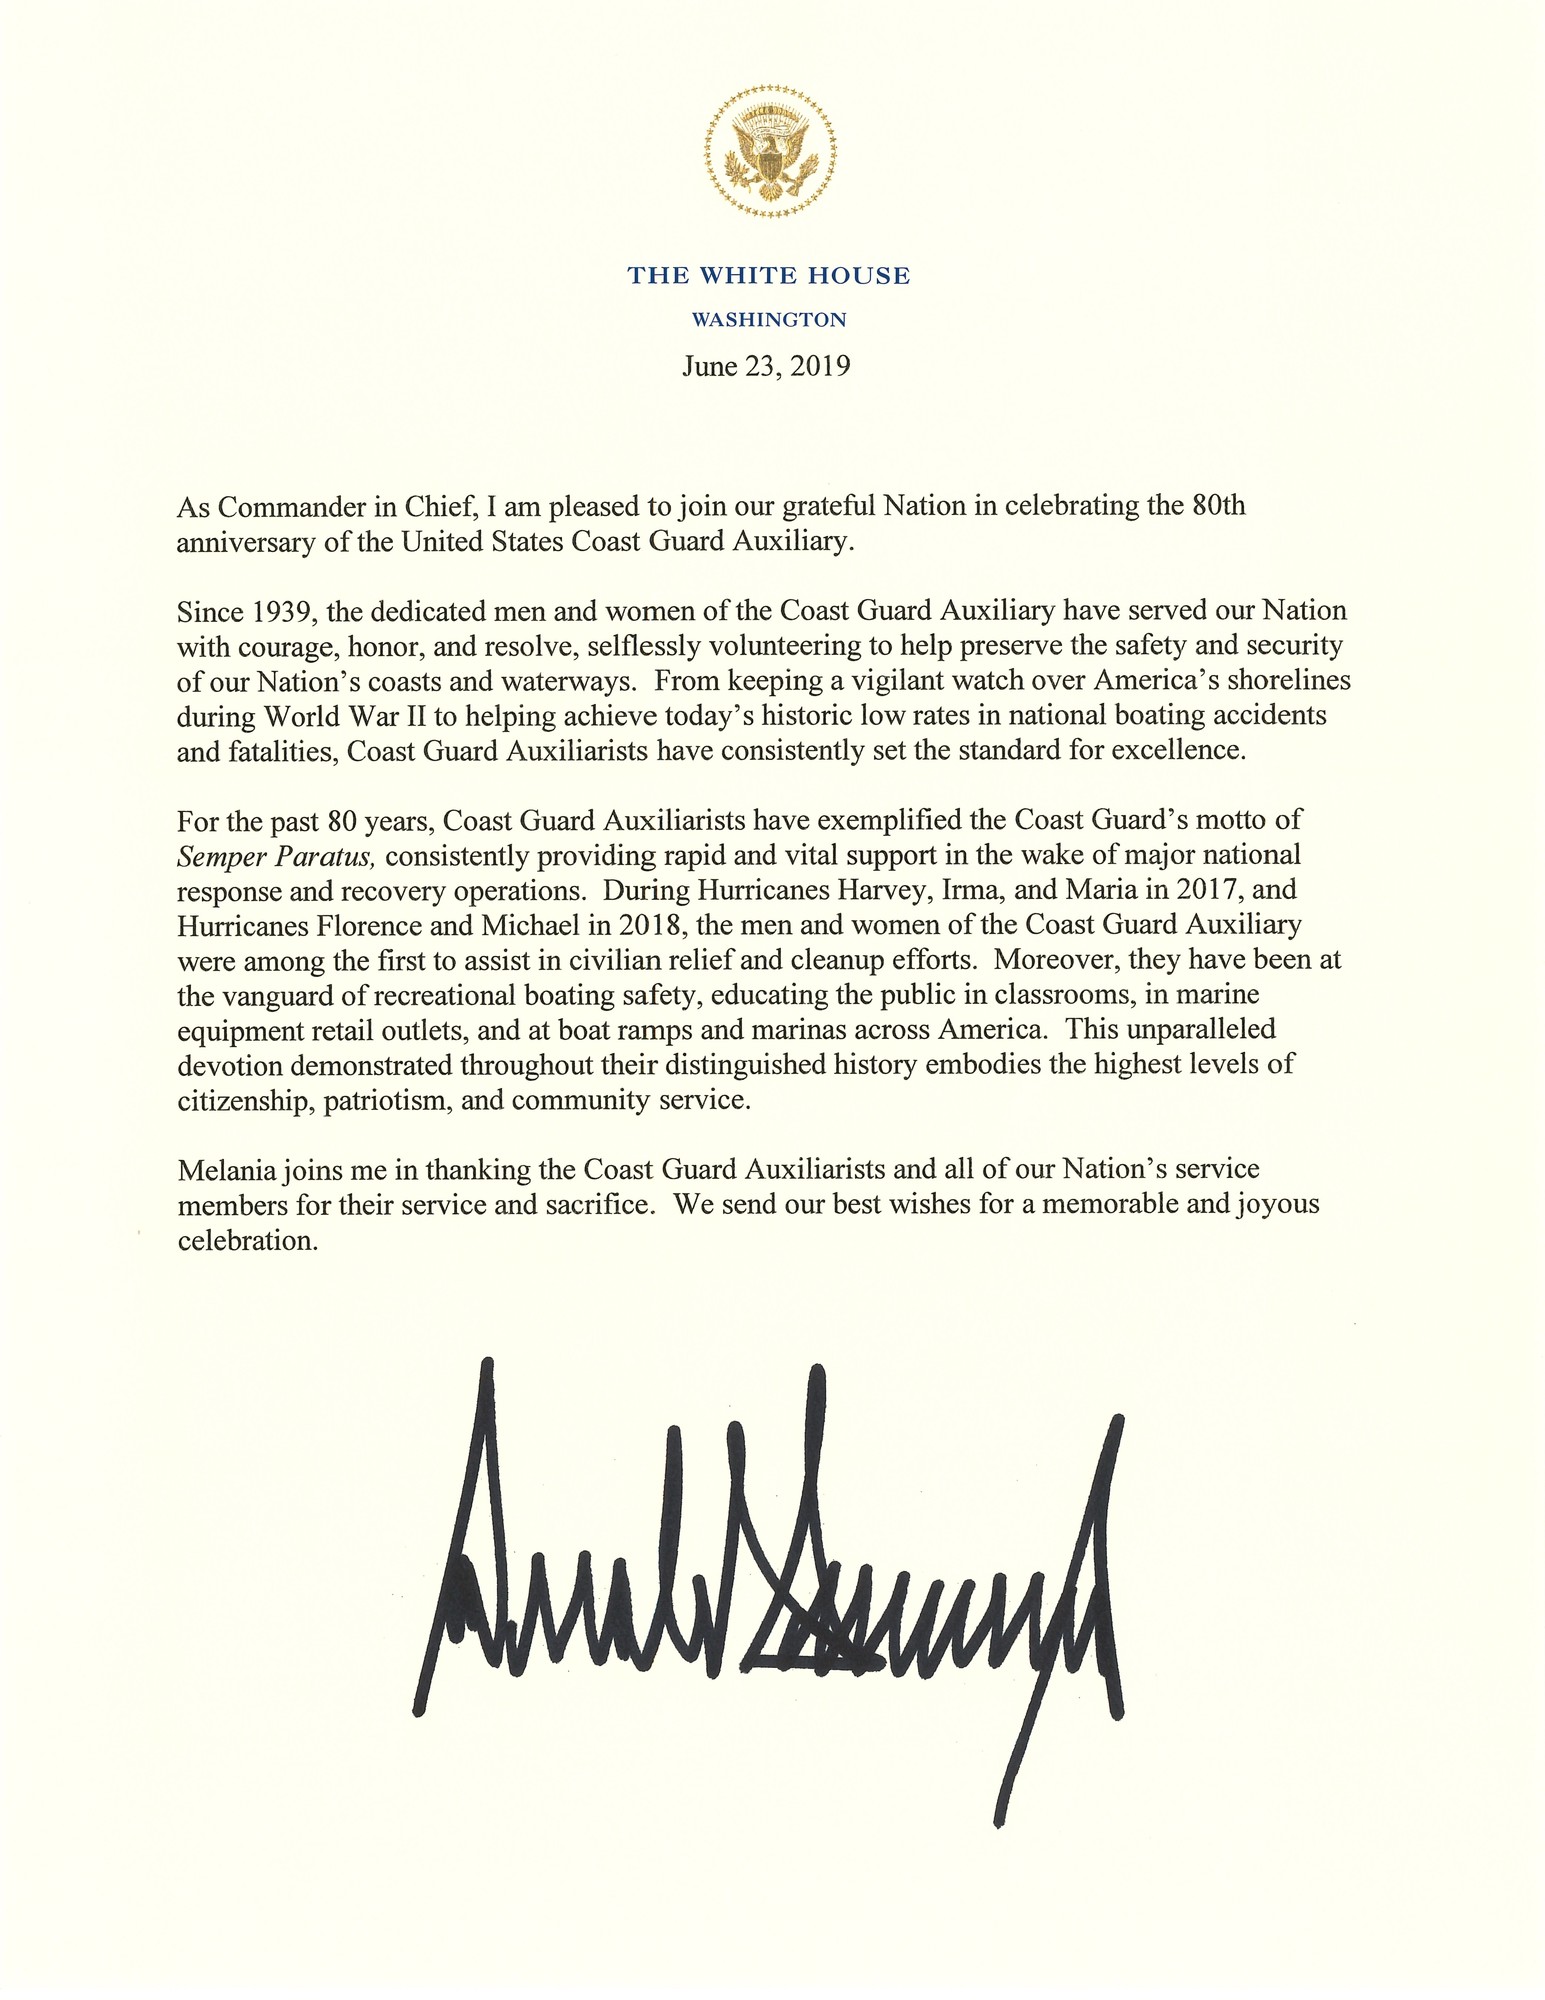 Final Presidential Message on USCG Auxiliary 80th Anniversary.pdf